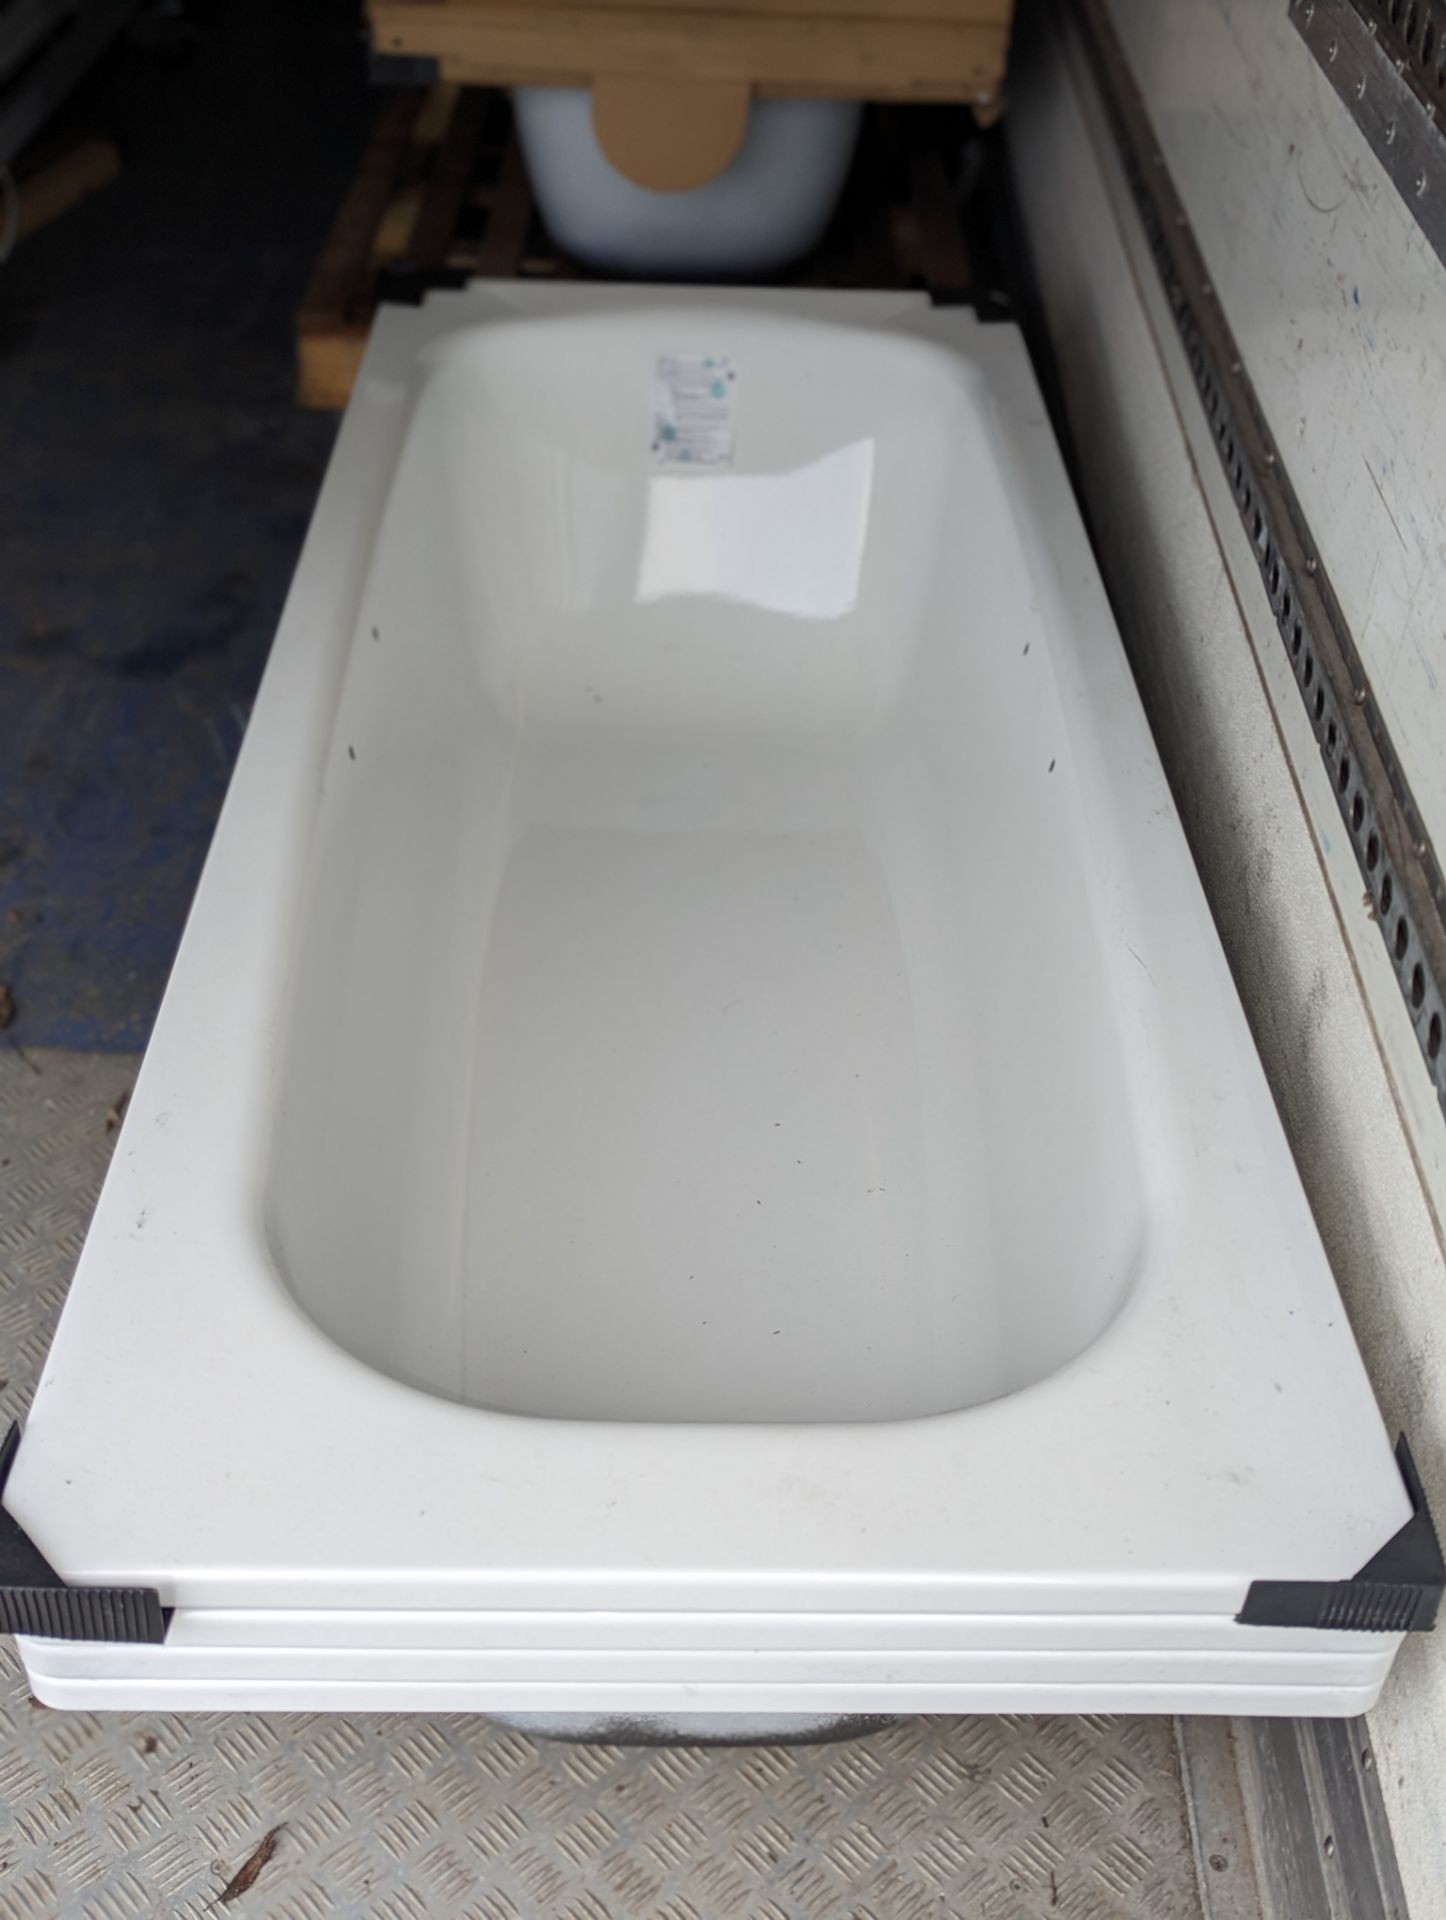 5 X STEEL BATH TUBS WITH LEGSETS AND GRIPS - Image 2 of 4